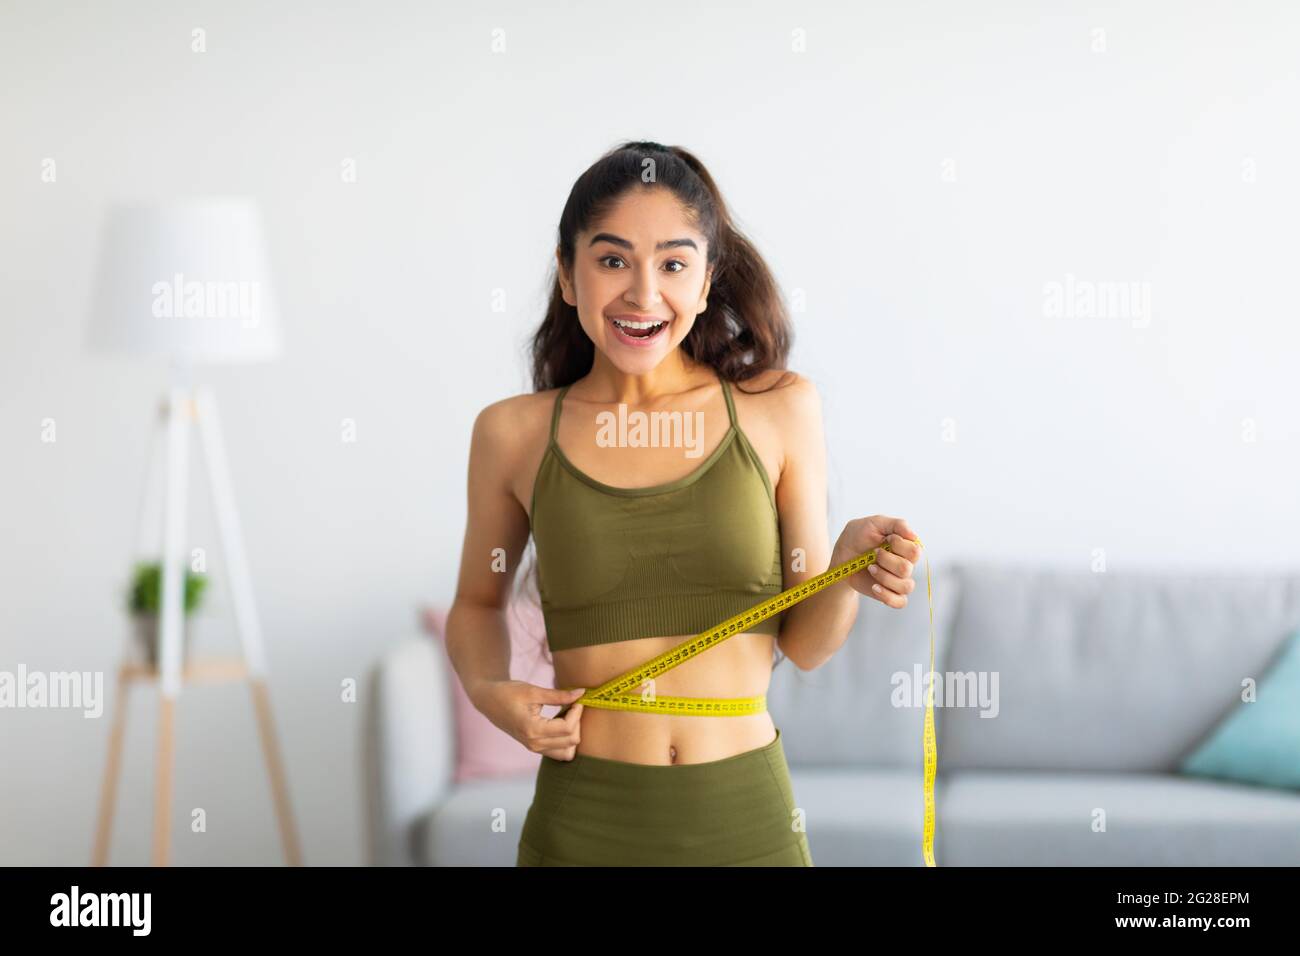 Portrait of young Indian woman measuring her waist with tape indoors, smiling at camera Stock Photo